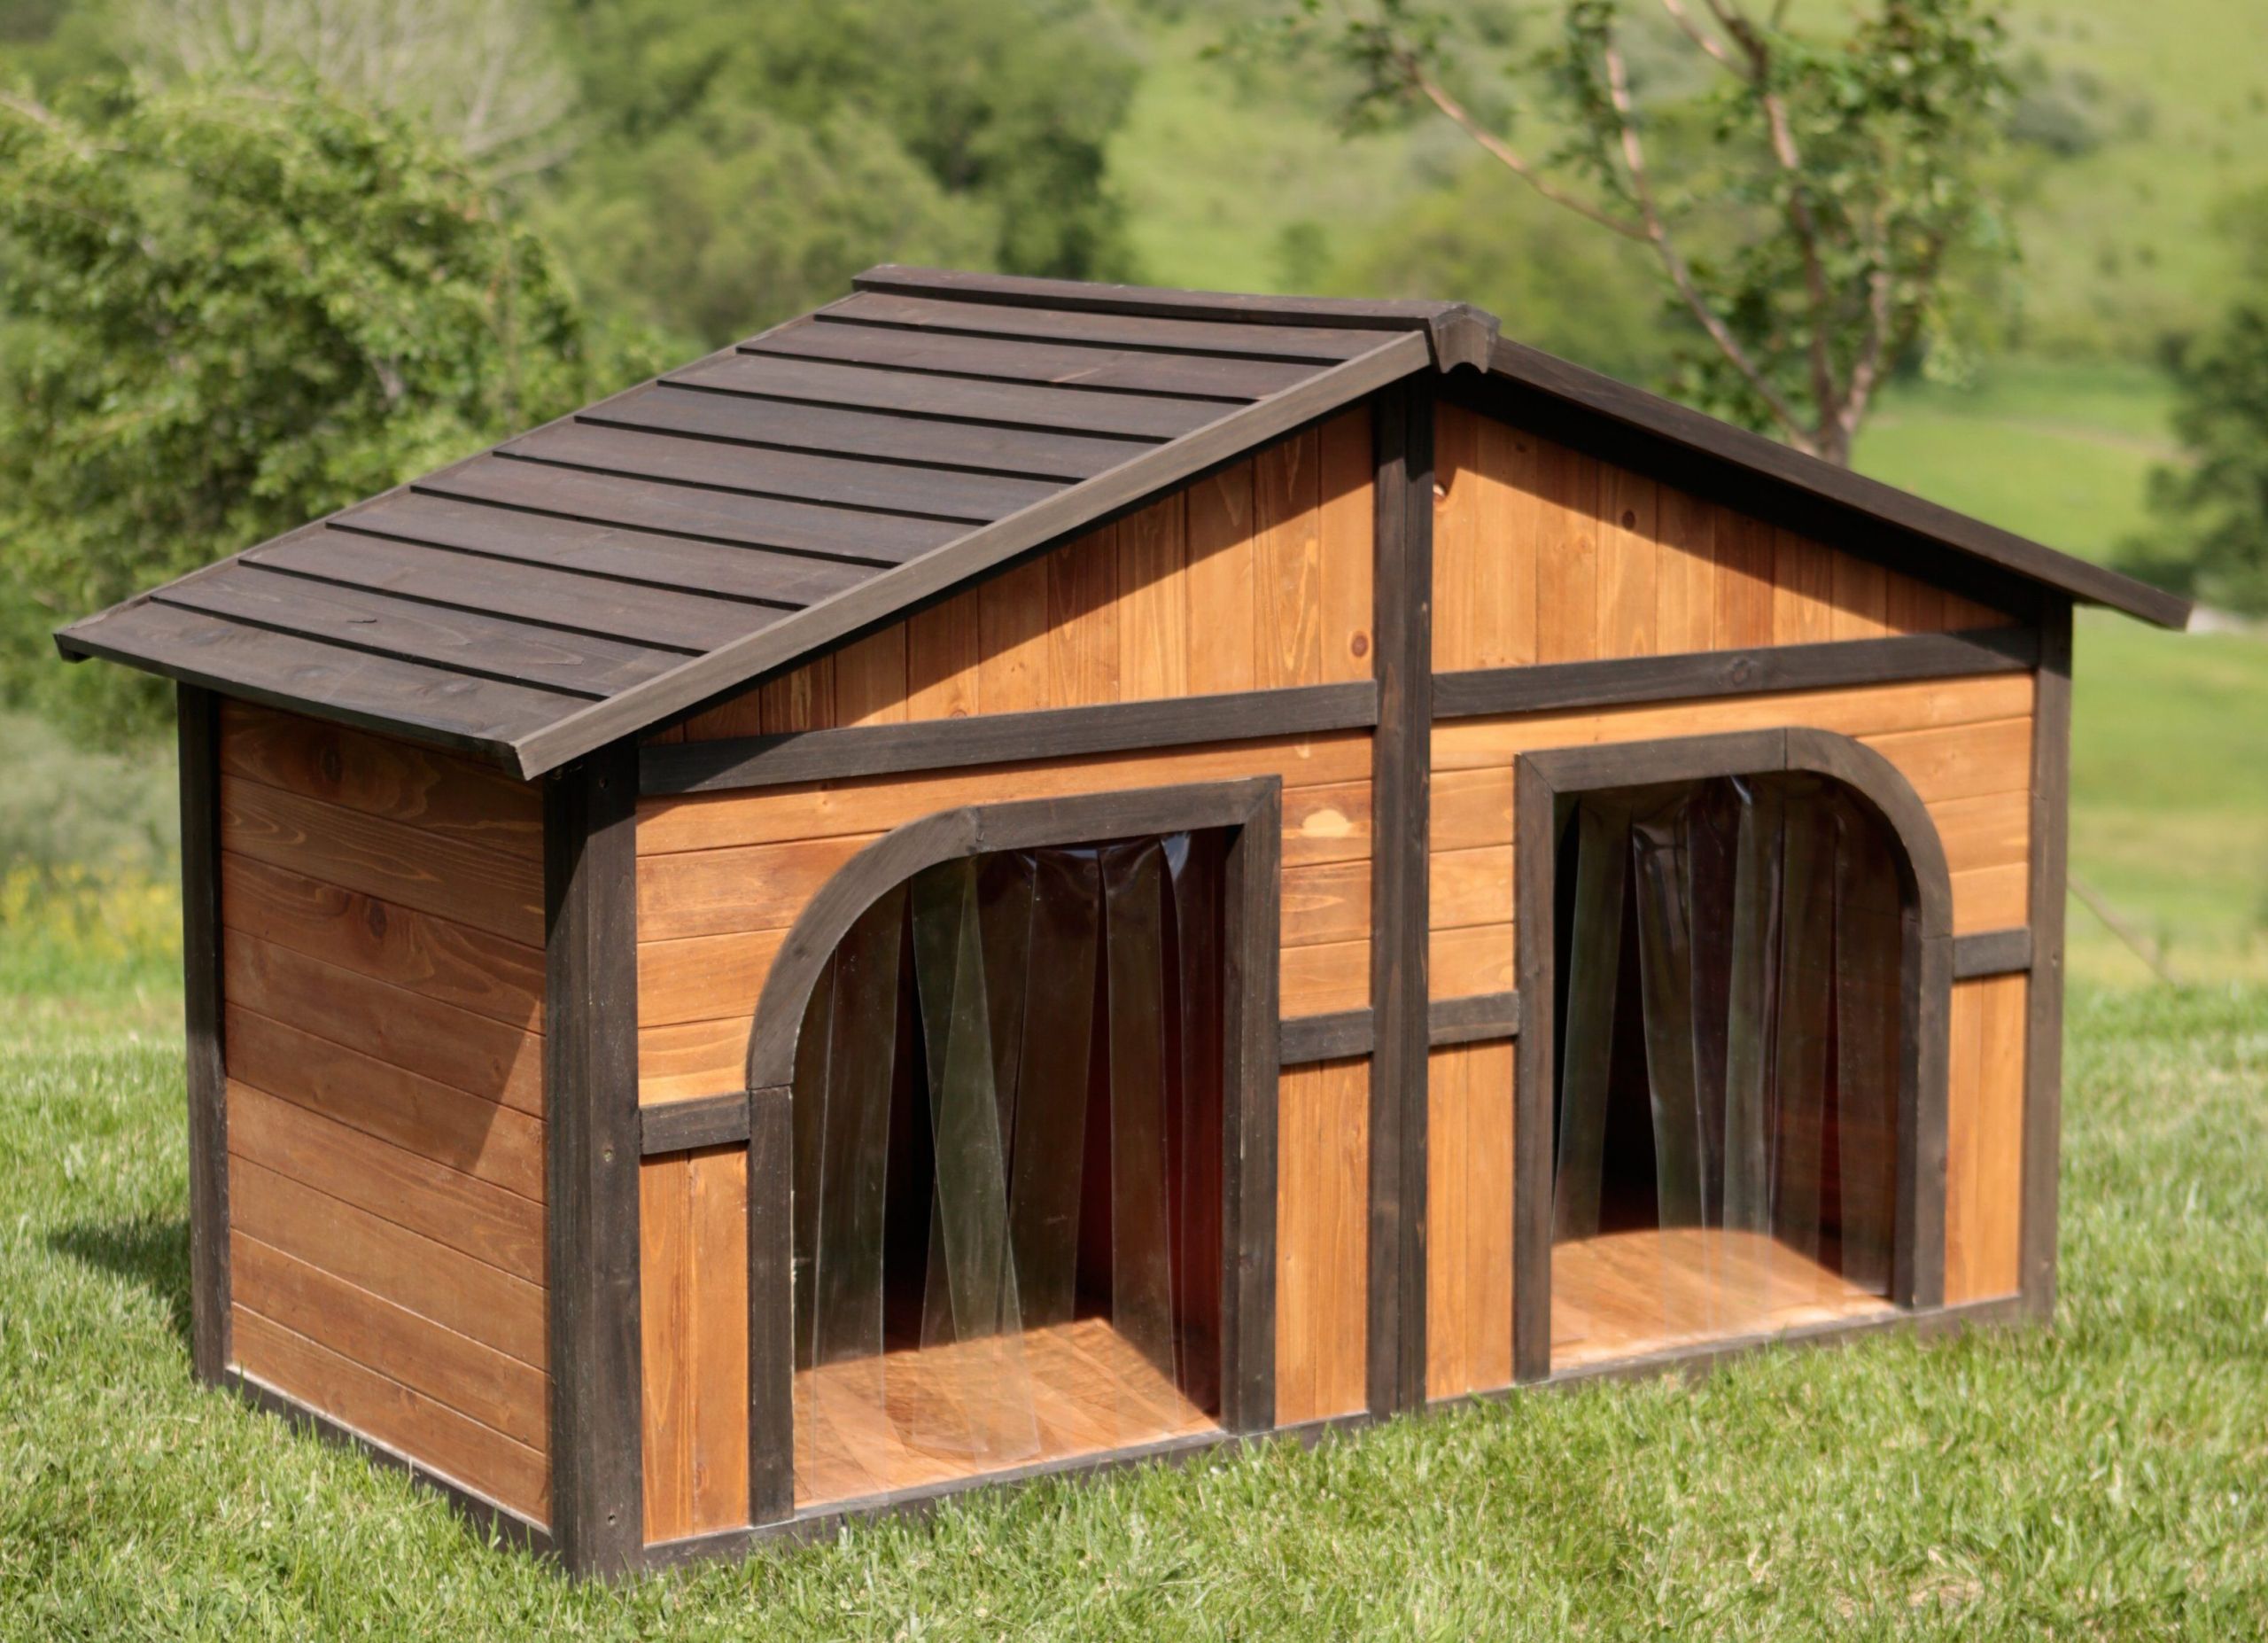 DIY Big Dog House
 10 Simple But Beautiful DIY Dog House Designs That You Can